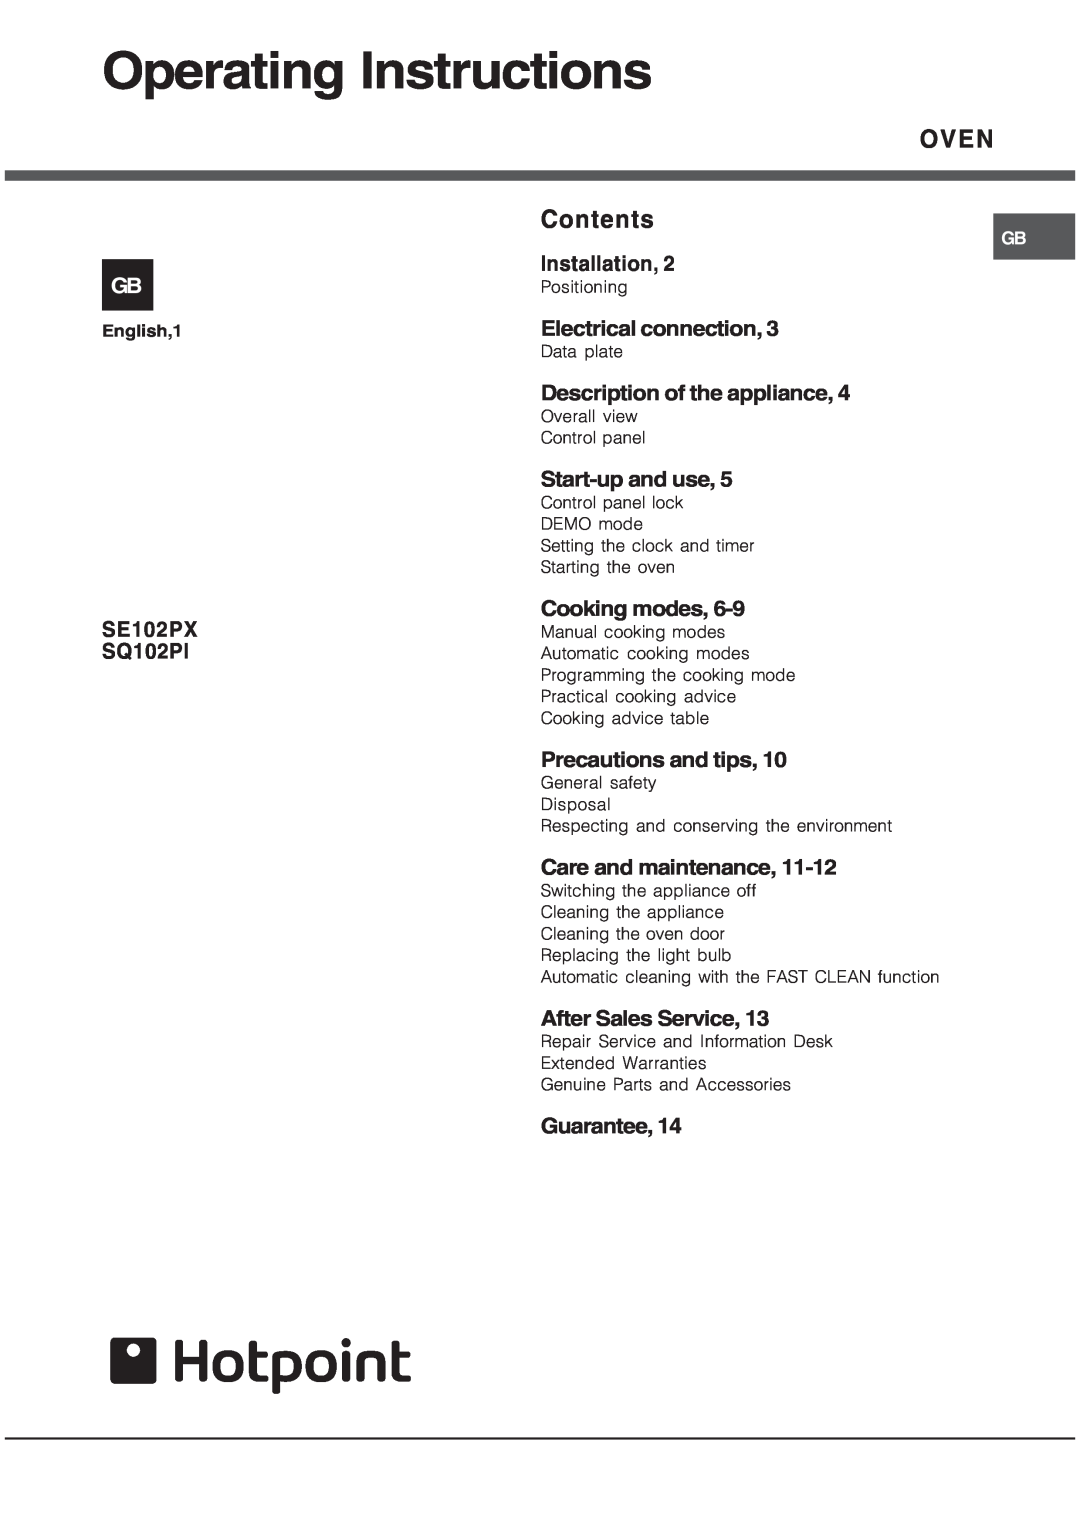 Hotpoint SE102PX, SQ102PI manual Operating Instructions, OVEN Contents 